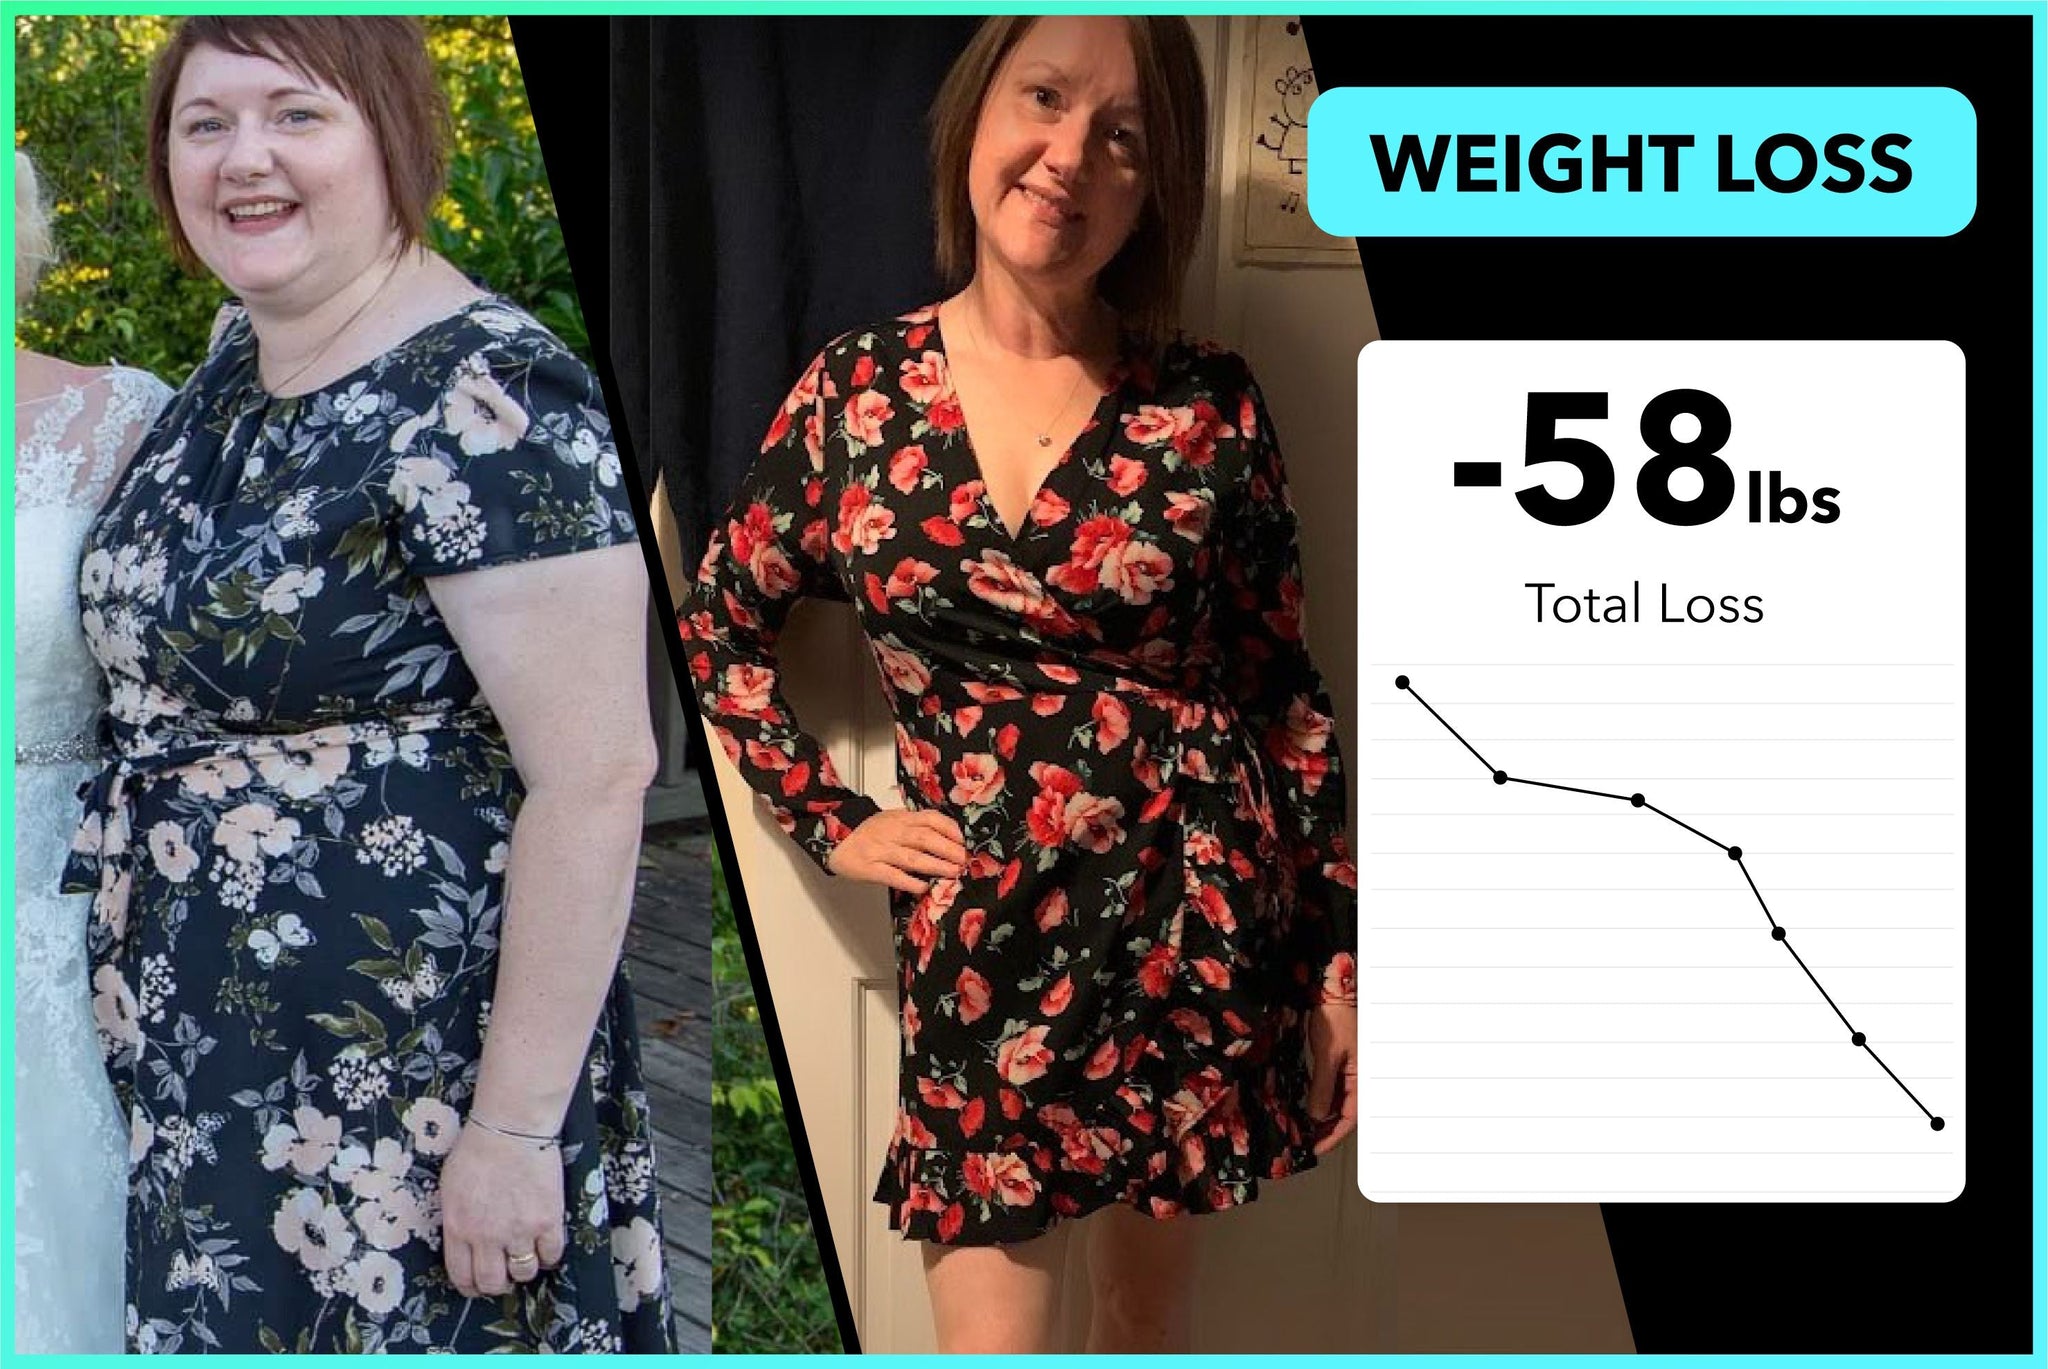 Jenny lost 58lbs on the Life Plan